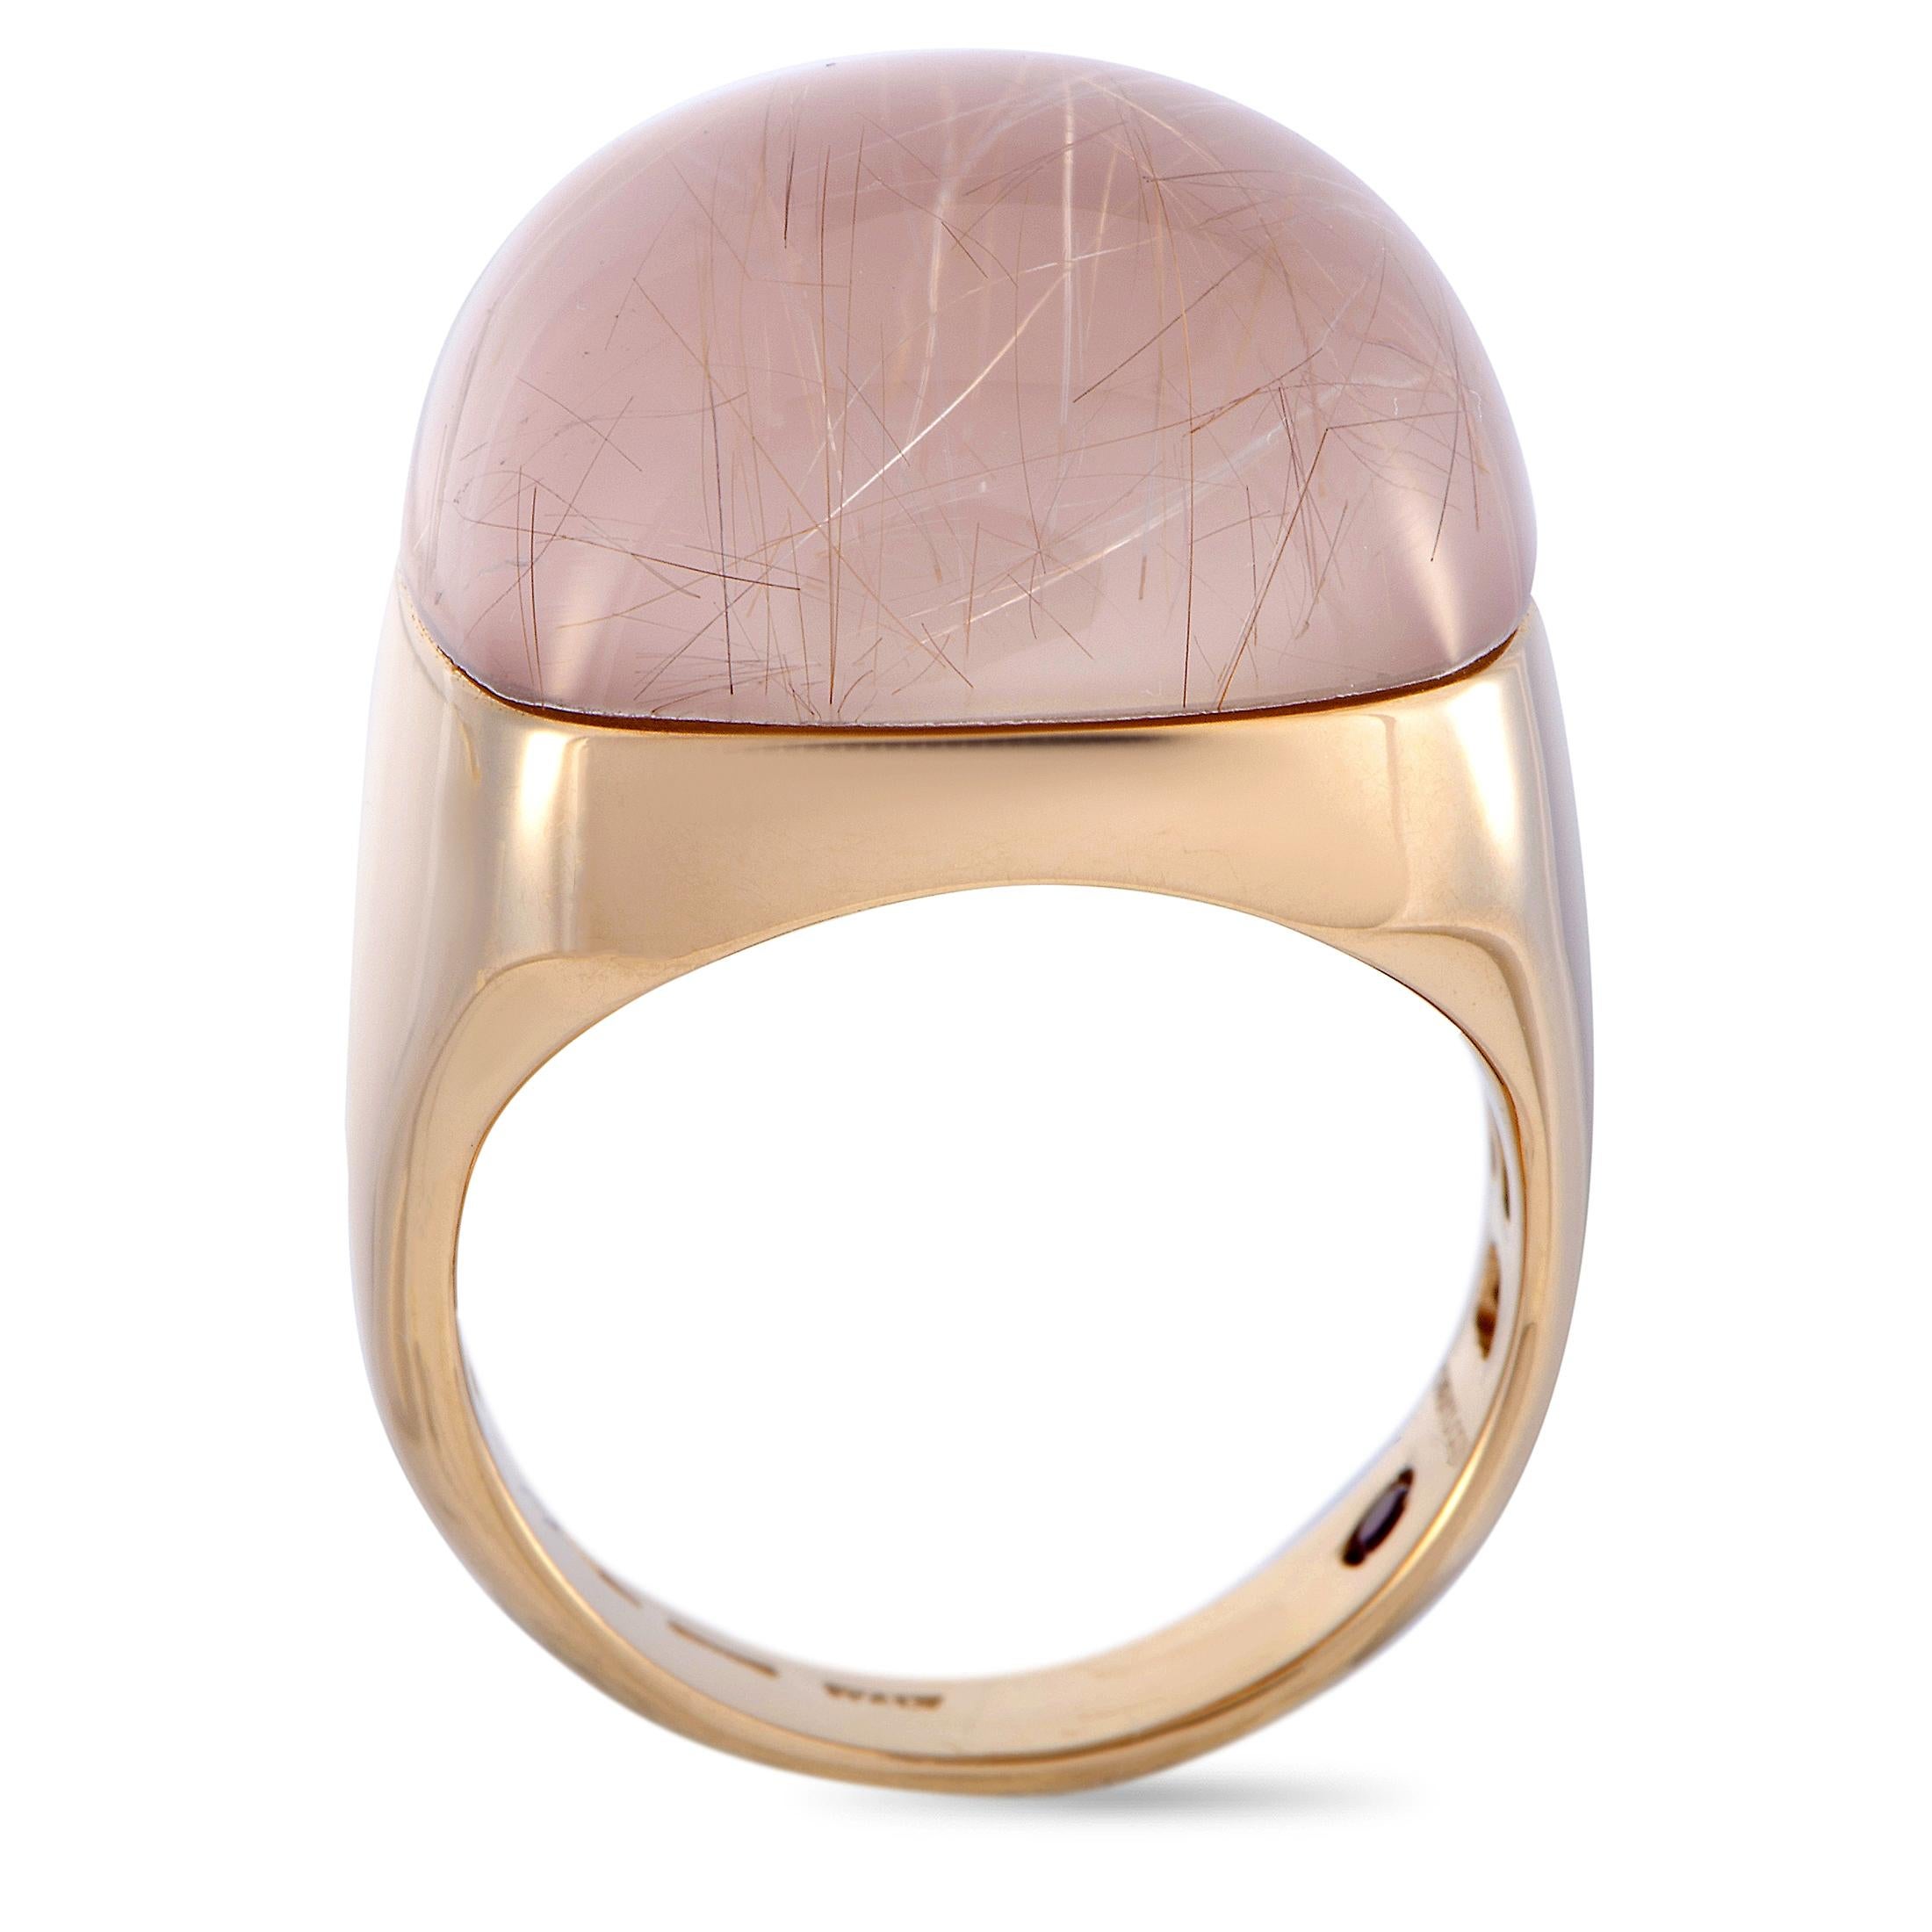 This Roberto Coin ring is crafted from 18K rose gold and set with a rutilated quartz. The ring weighs 13.6 grams, boasting band thickness of 4 mm and top height of 10 mm, while top dimensions measure 20 by 20 mm.
Ring Size: 6.5
Offered in brand new